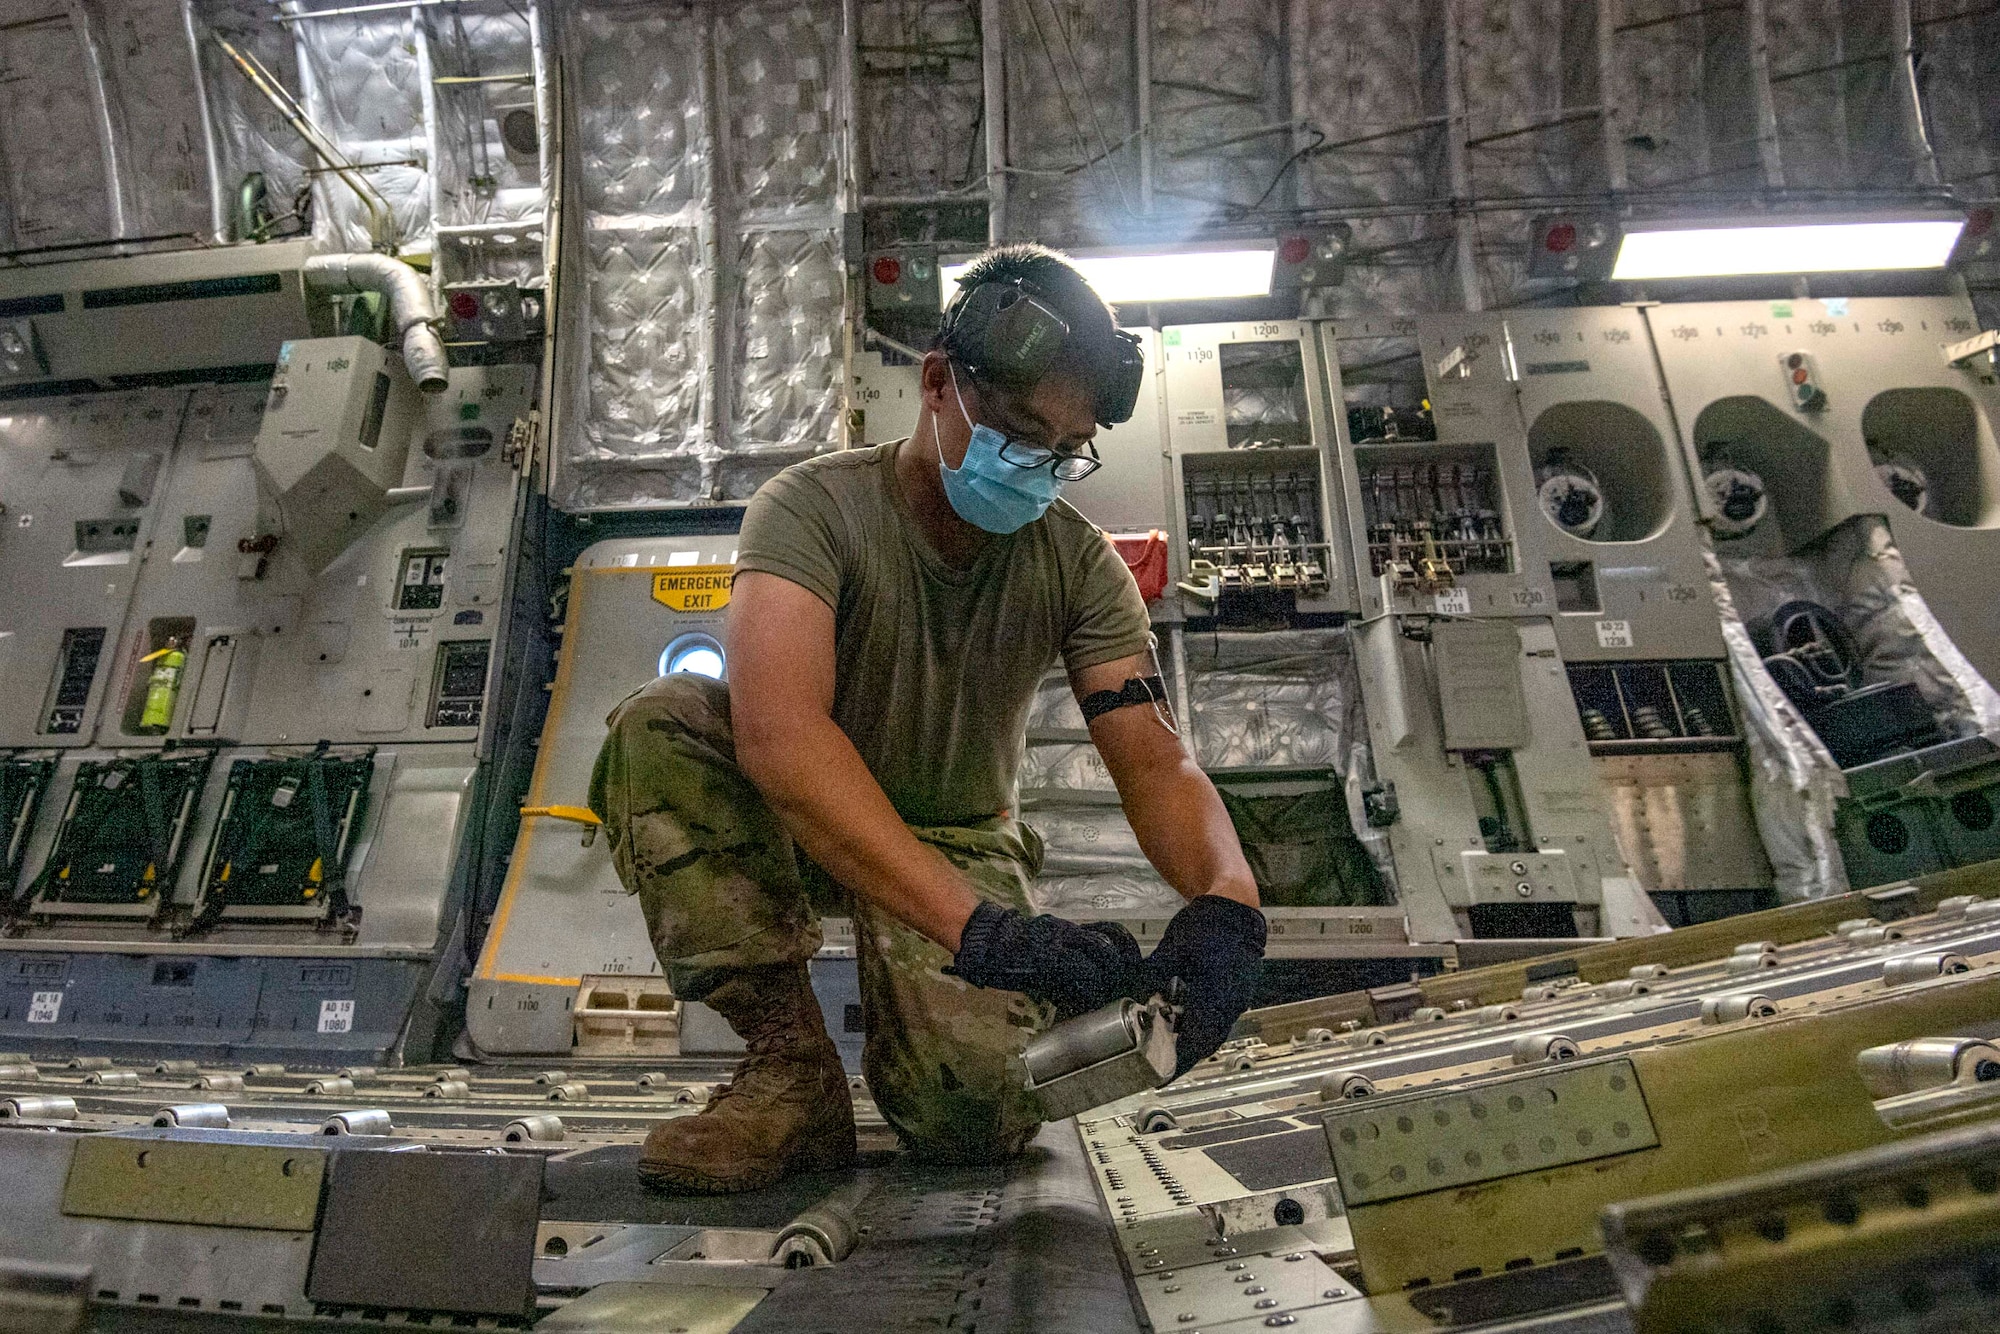 Senior Airman Alvarado Denton, 48th Aerial Port Squadron (APS), cargo specialist, reconfigures a Hawaii Air National Guard C-17 from the 154th Wing to receive cargo, while at Joint Base Pearl Harbor-Hickam, Jan. 20, 2022.